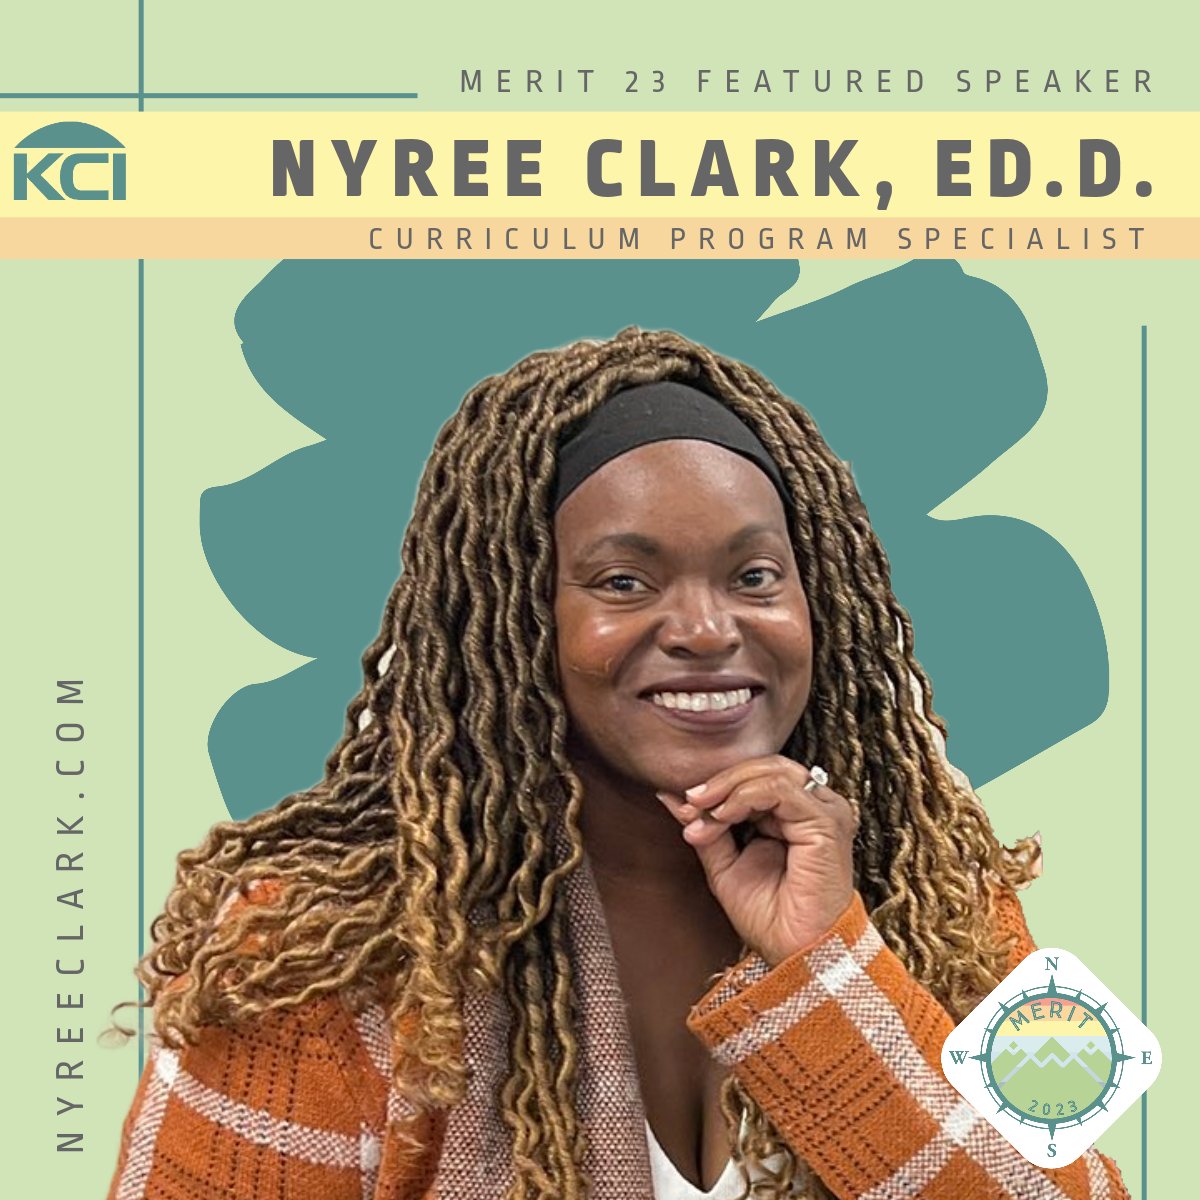 We are soooooooooo excited for our featured speaker for #MERIT23 this Friday! The fantabulous @DrNyreeClark will be sharing her wisdom, insight, and just overall amazingness with our wonderful cohort of educators at the @krausecenter ! Can't wait!!!